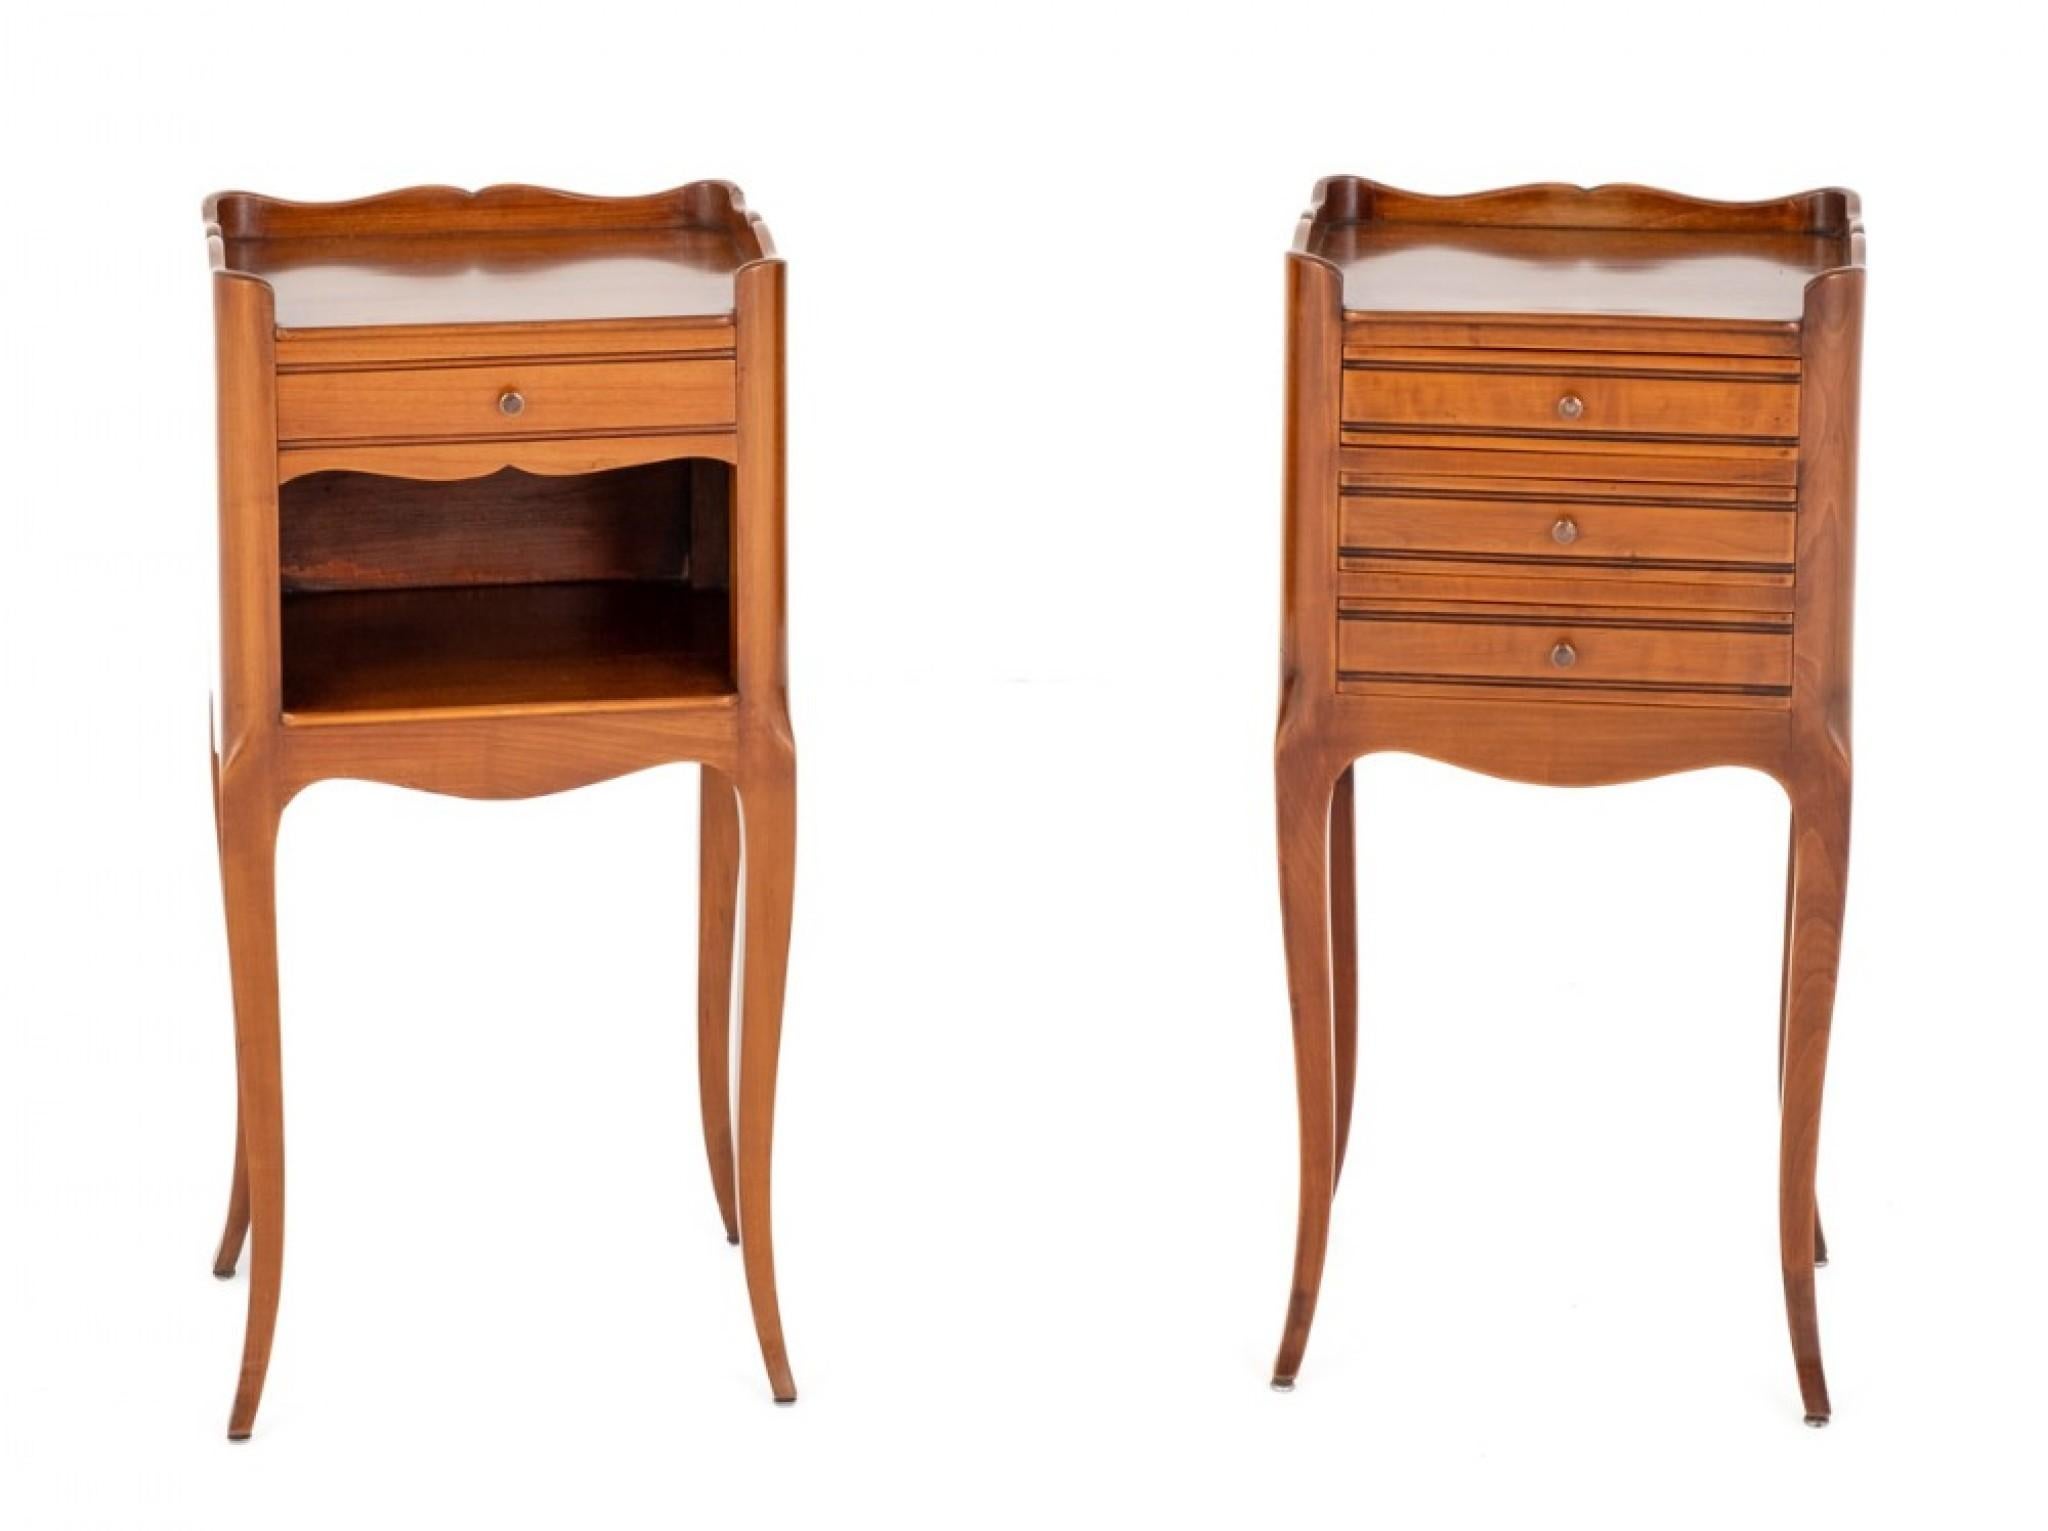 Pair of French Walnut Bedside Cabinets.
These Cabinets Stand Upon Elegant Shaped Legs.
One Cabinet Features 3 x oak Lined Drawers.
The 2nd Cabinet Features 1 x Oak Lined Drawer and a Useful Storage Space.
Each Cabinet Having a Shaped Upstand to the